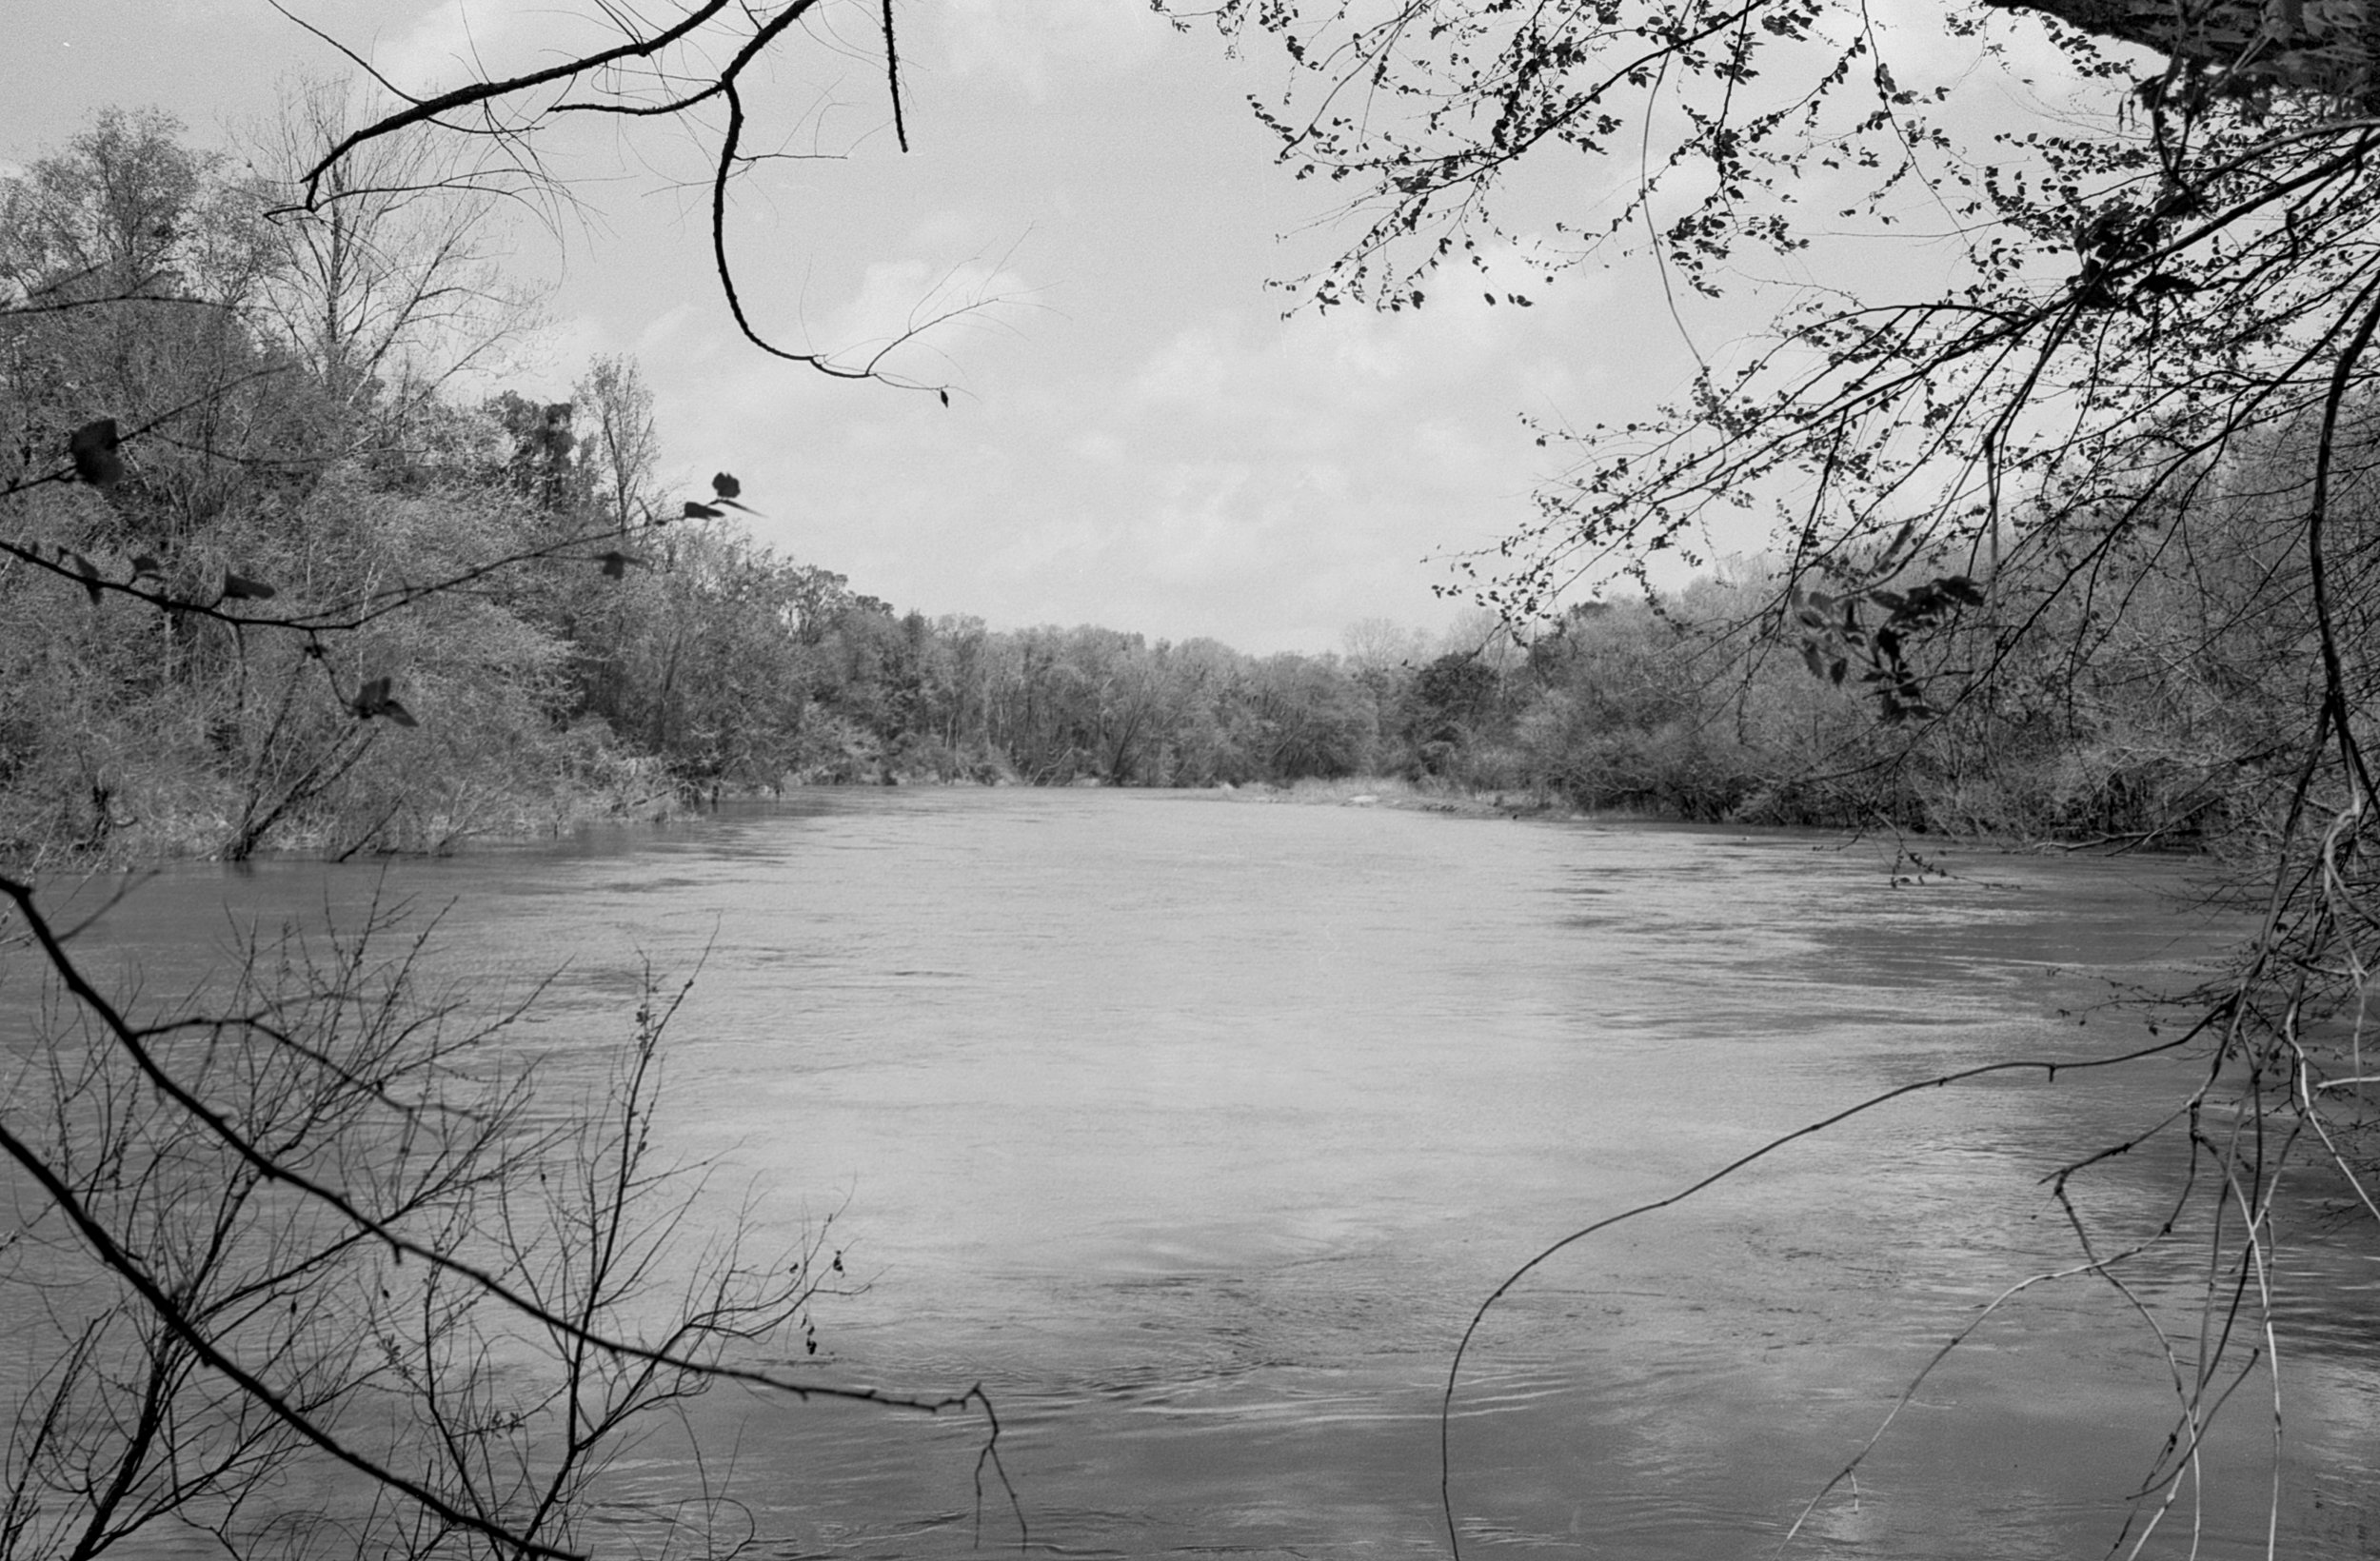  Tombigbee River near Amory, Mississippi - captured using a Canon AE-1 Program camera with an FD 35mm f/2.8 lens on Fuji Neopan Acros 100 film, developed with Ilfosol-3 and then scanned using an Epson V850 flatbed scanner 